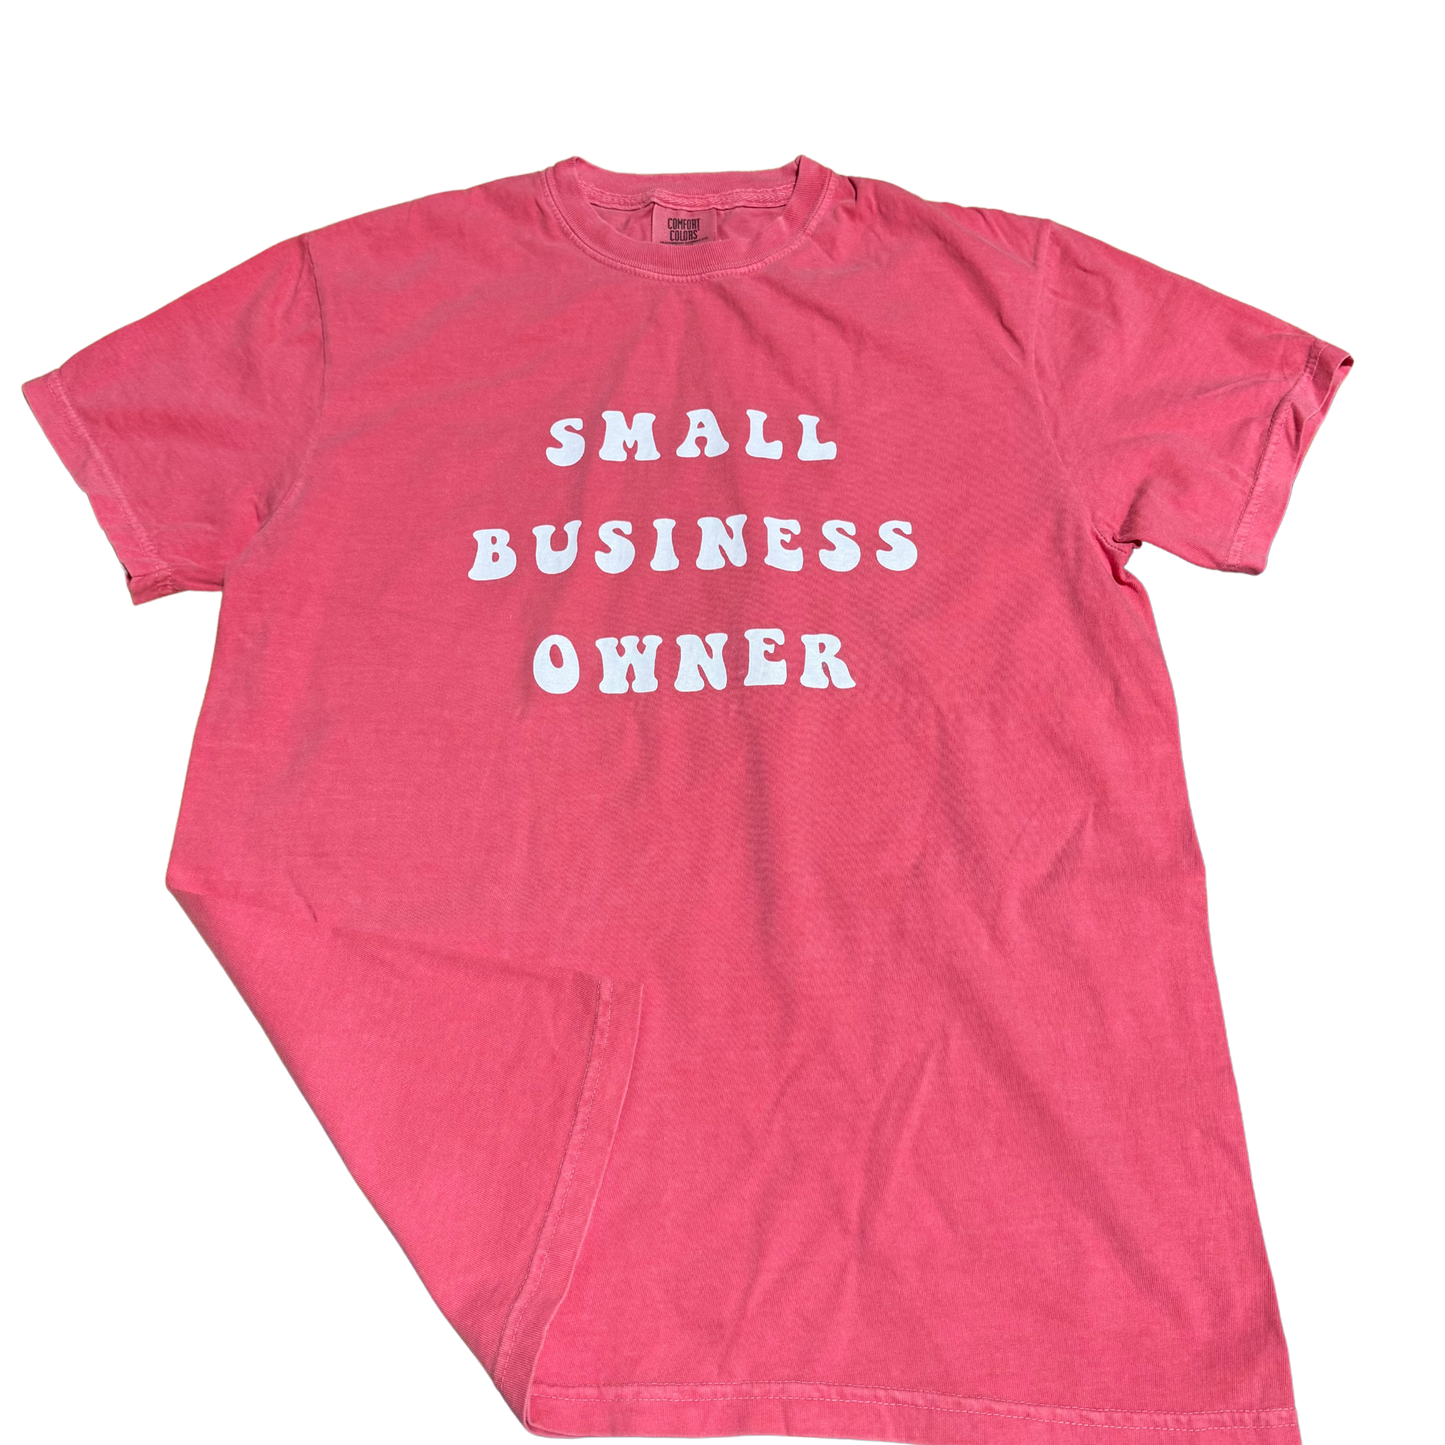 Watermelon Pink Classic Small Business Owner T-shirt